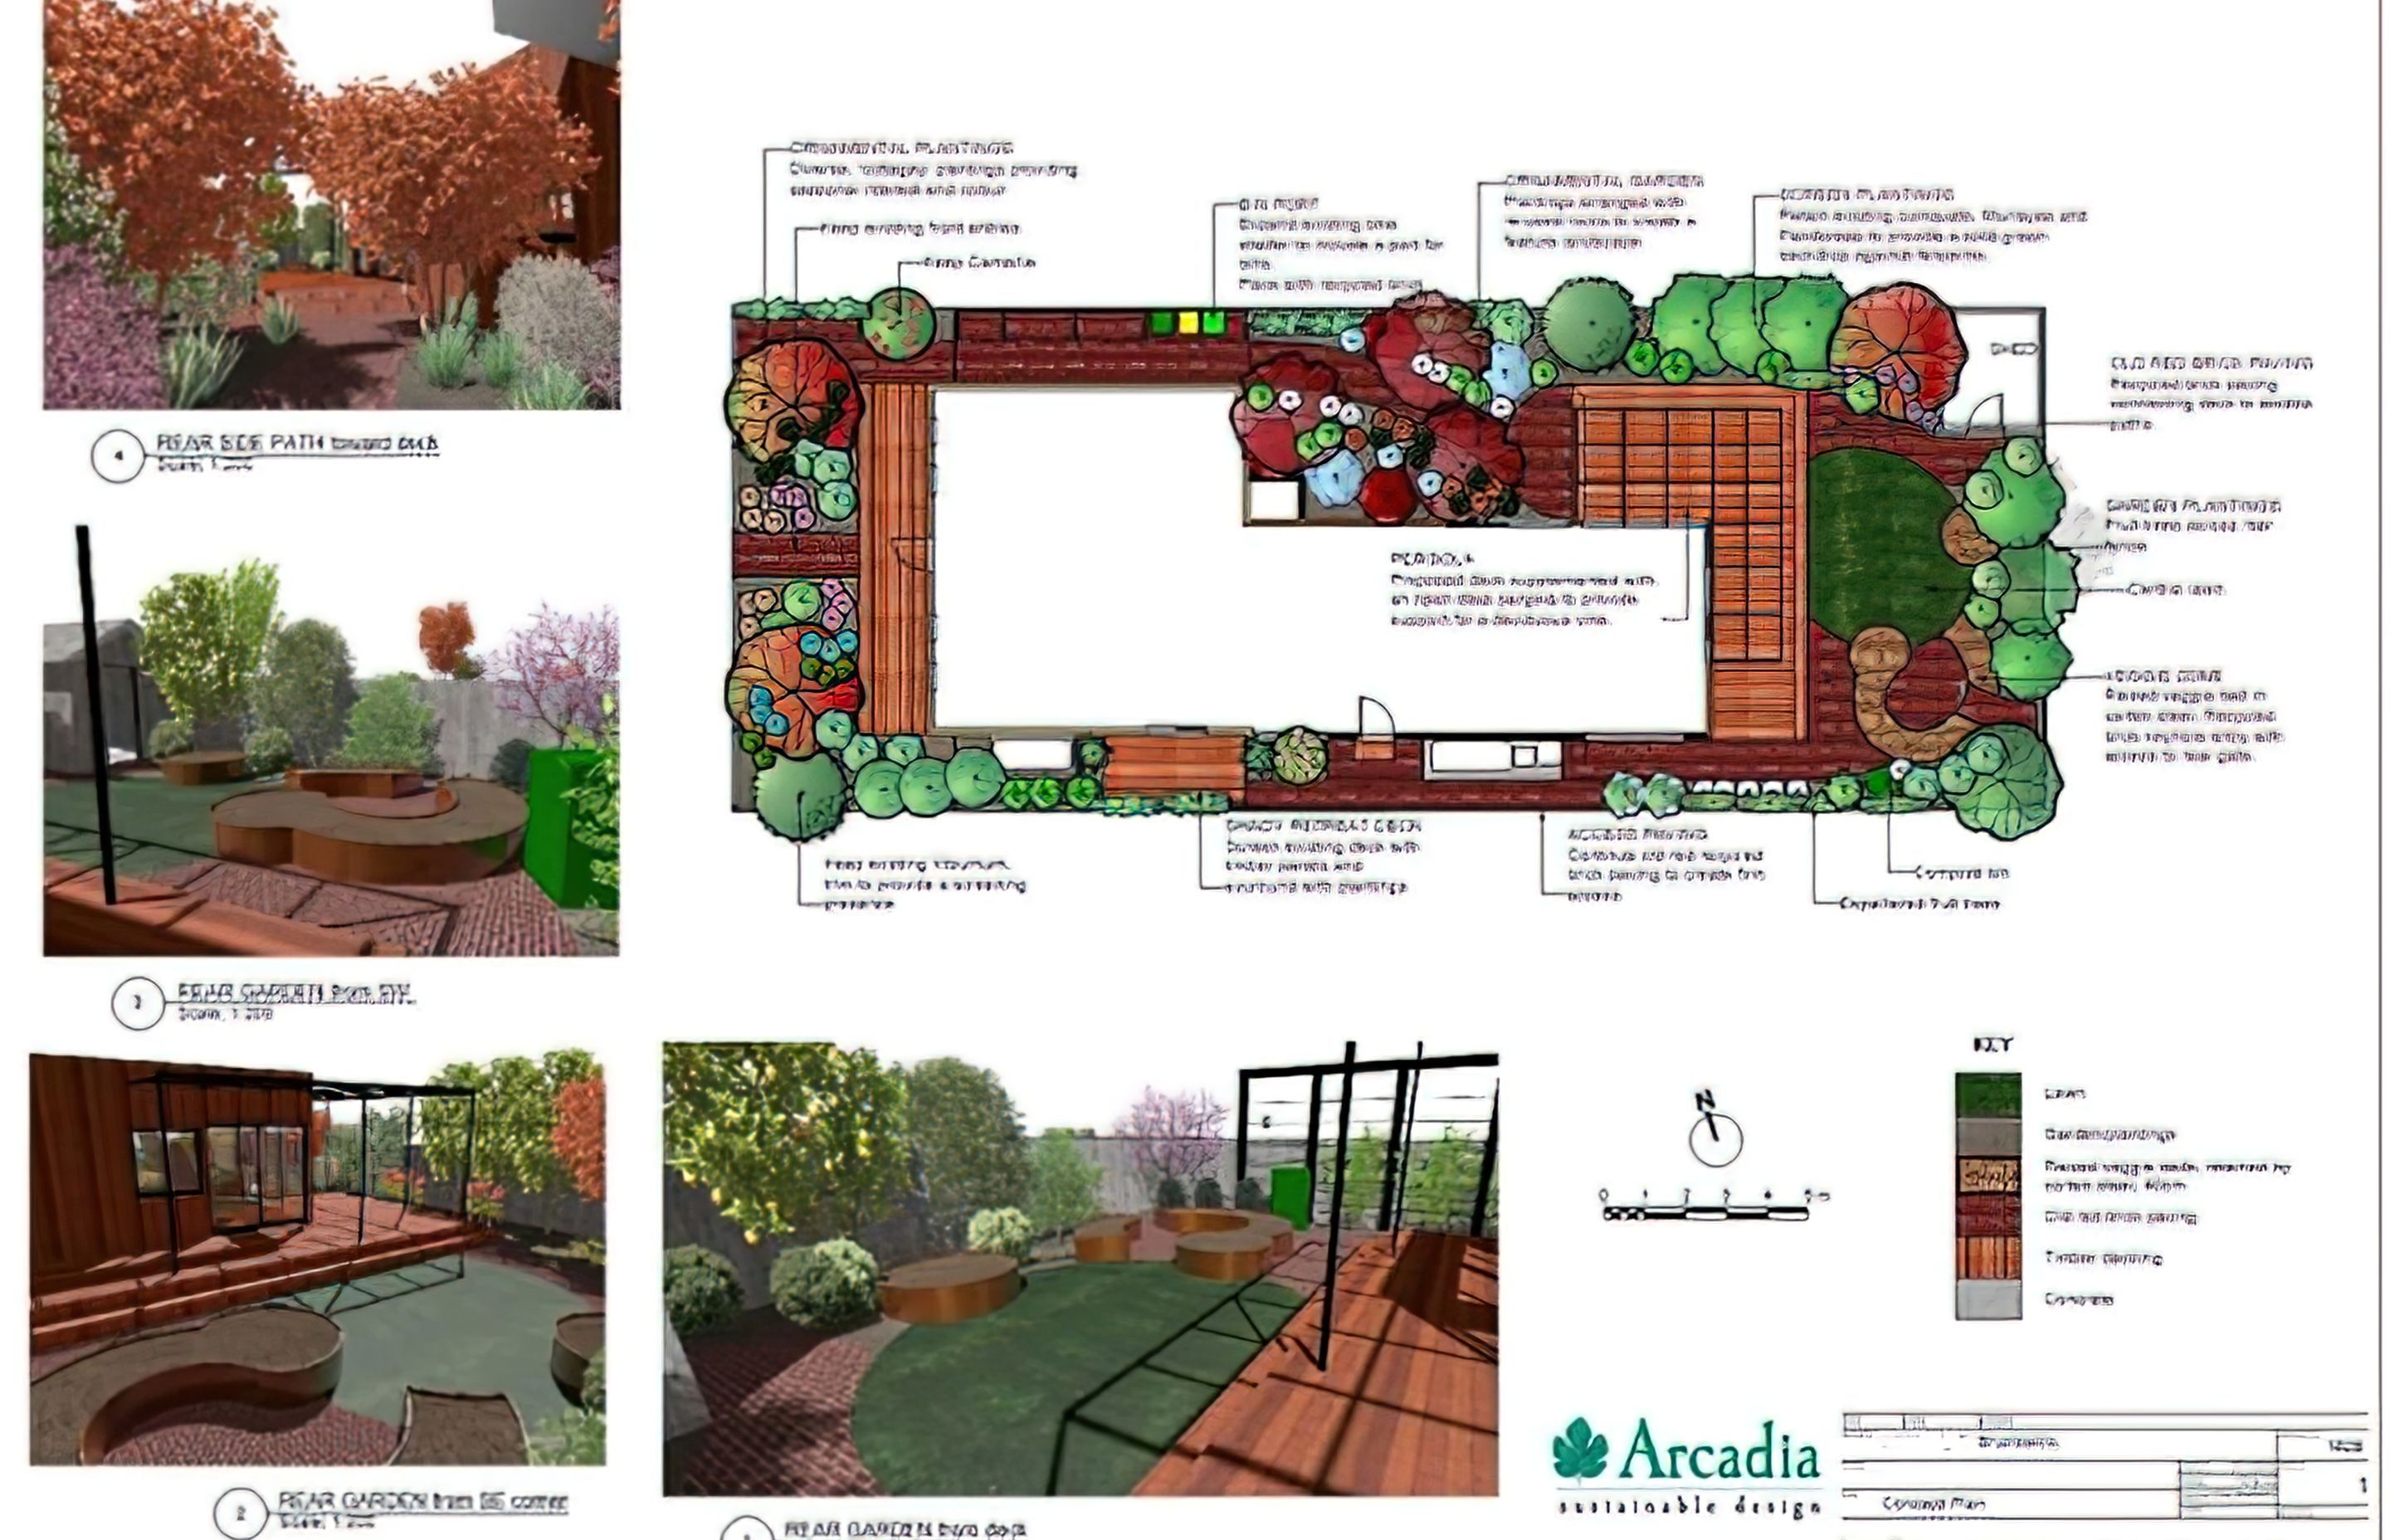 After consultation, a Concept plan was prepared to help home owners to visualise how a new garden design might work